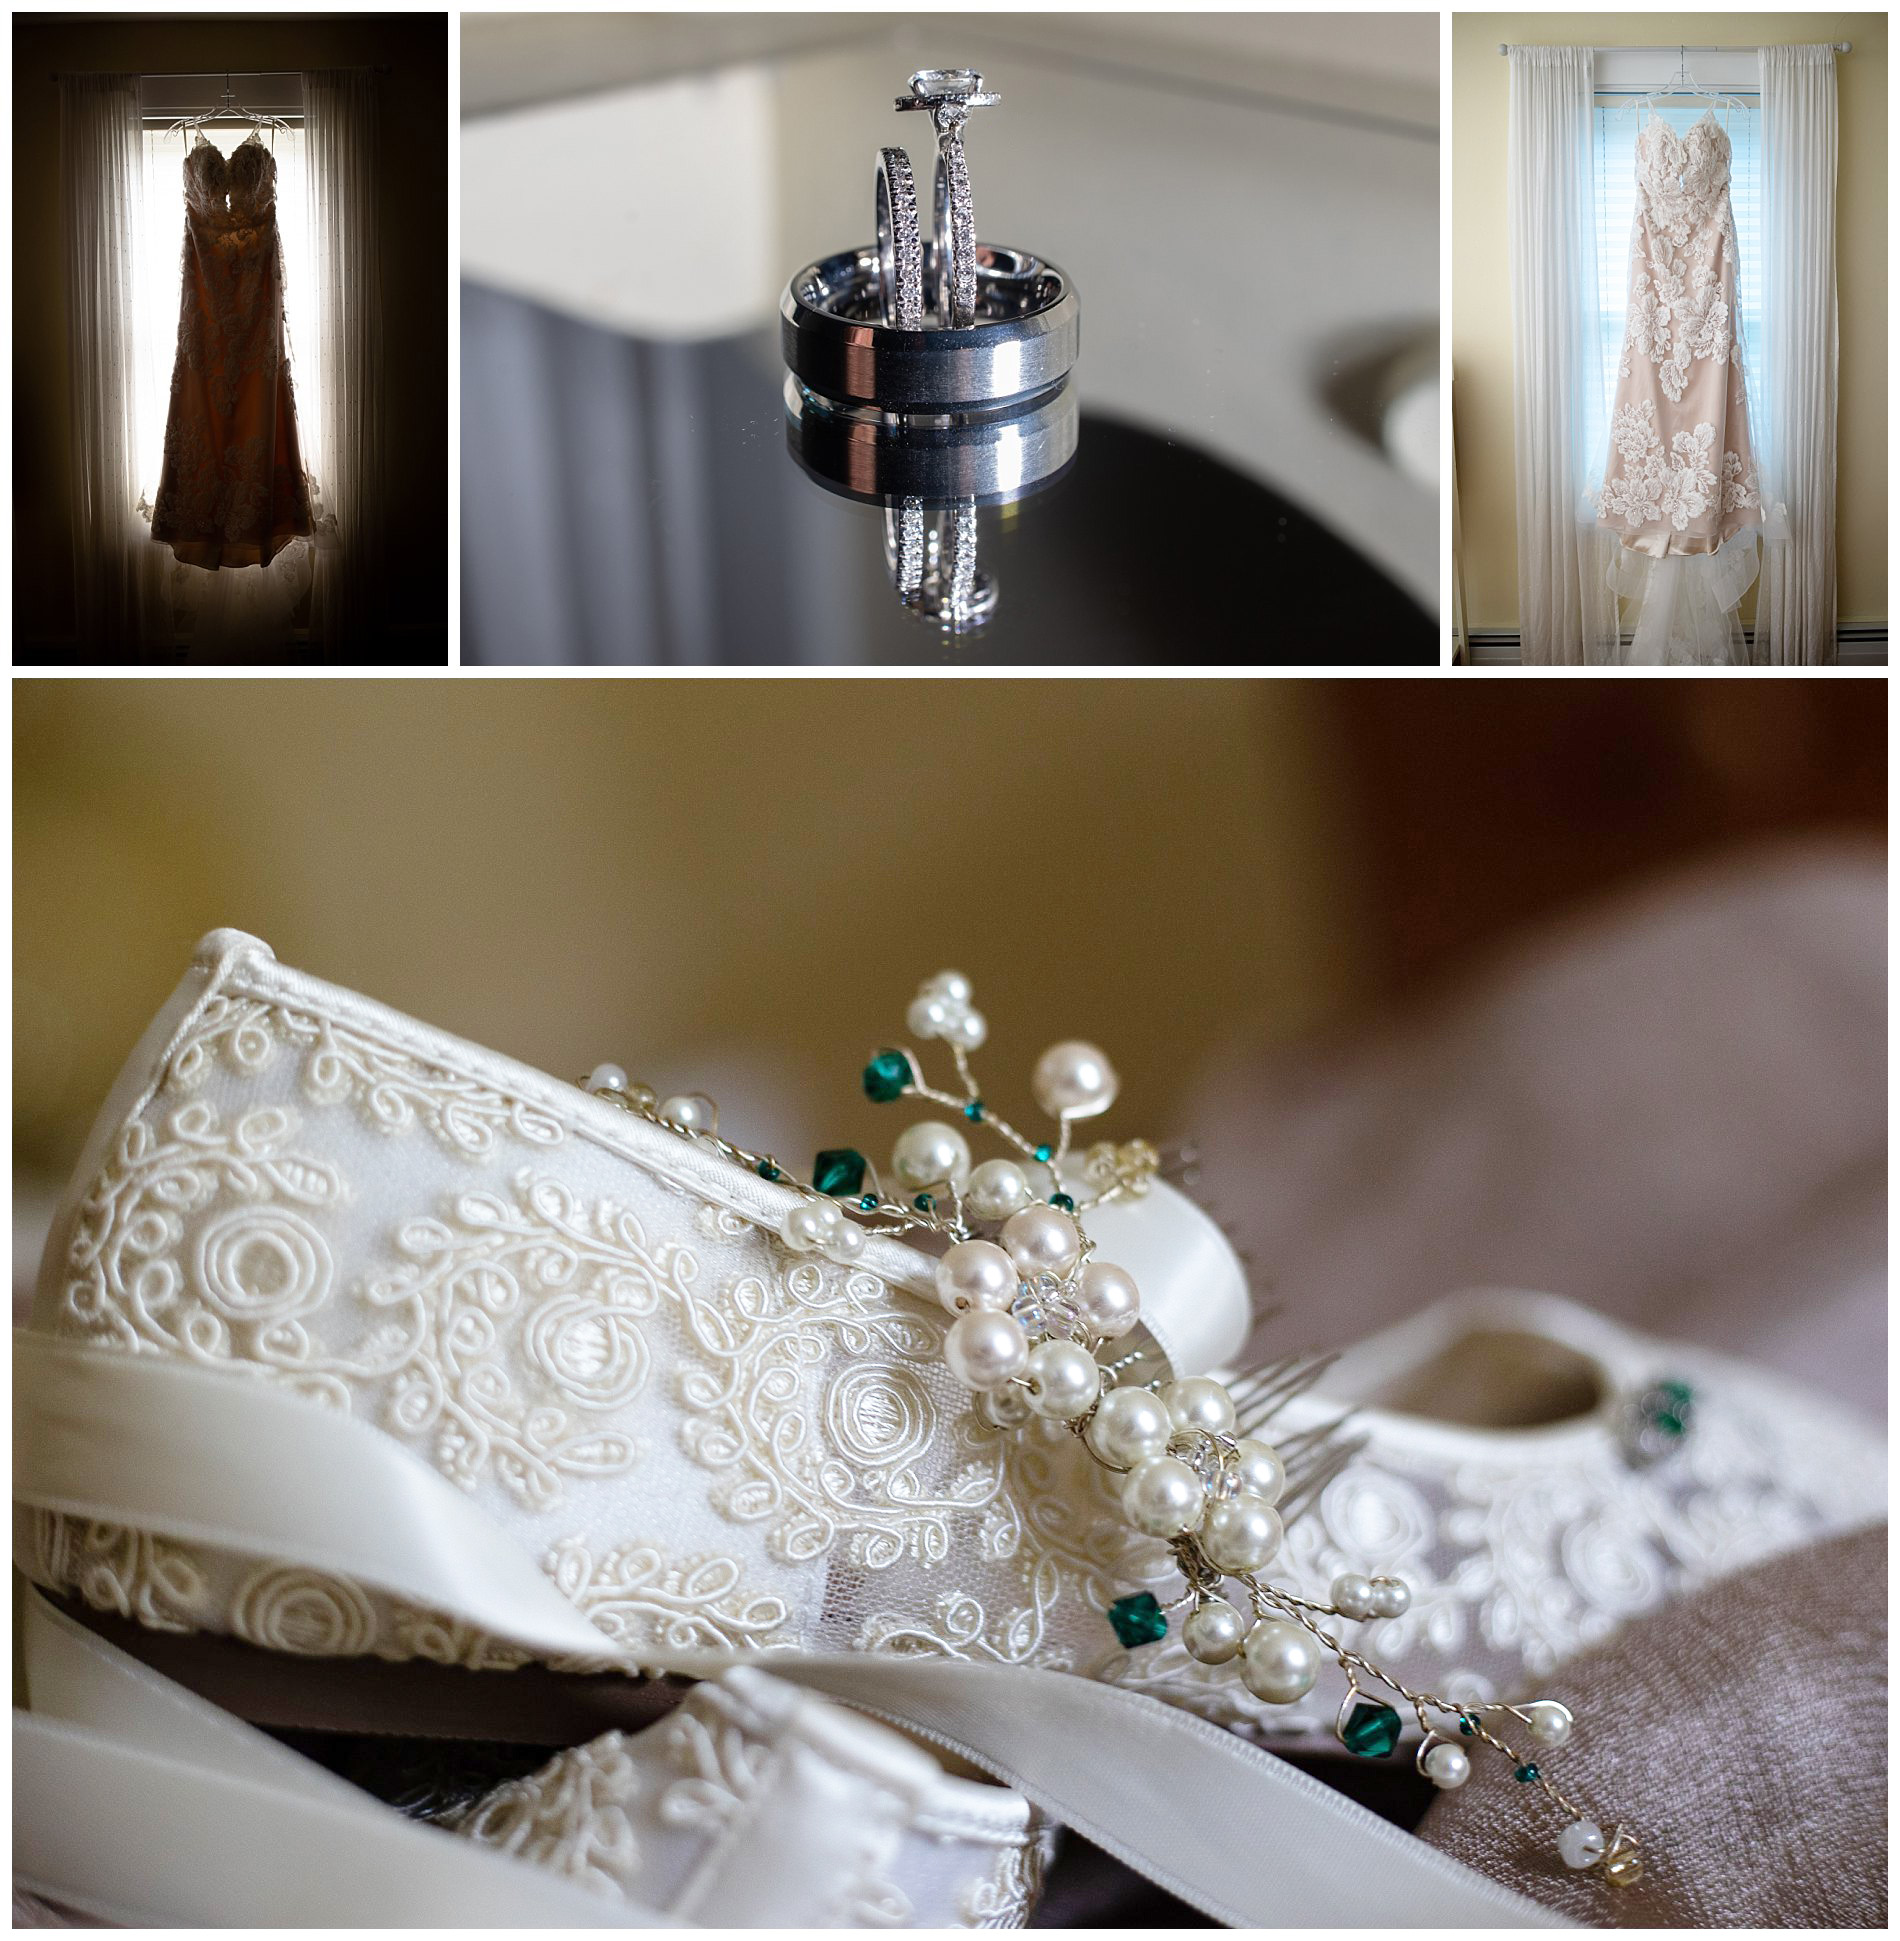 wedding details for the bride - dress, rings, shoes, jewelry